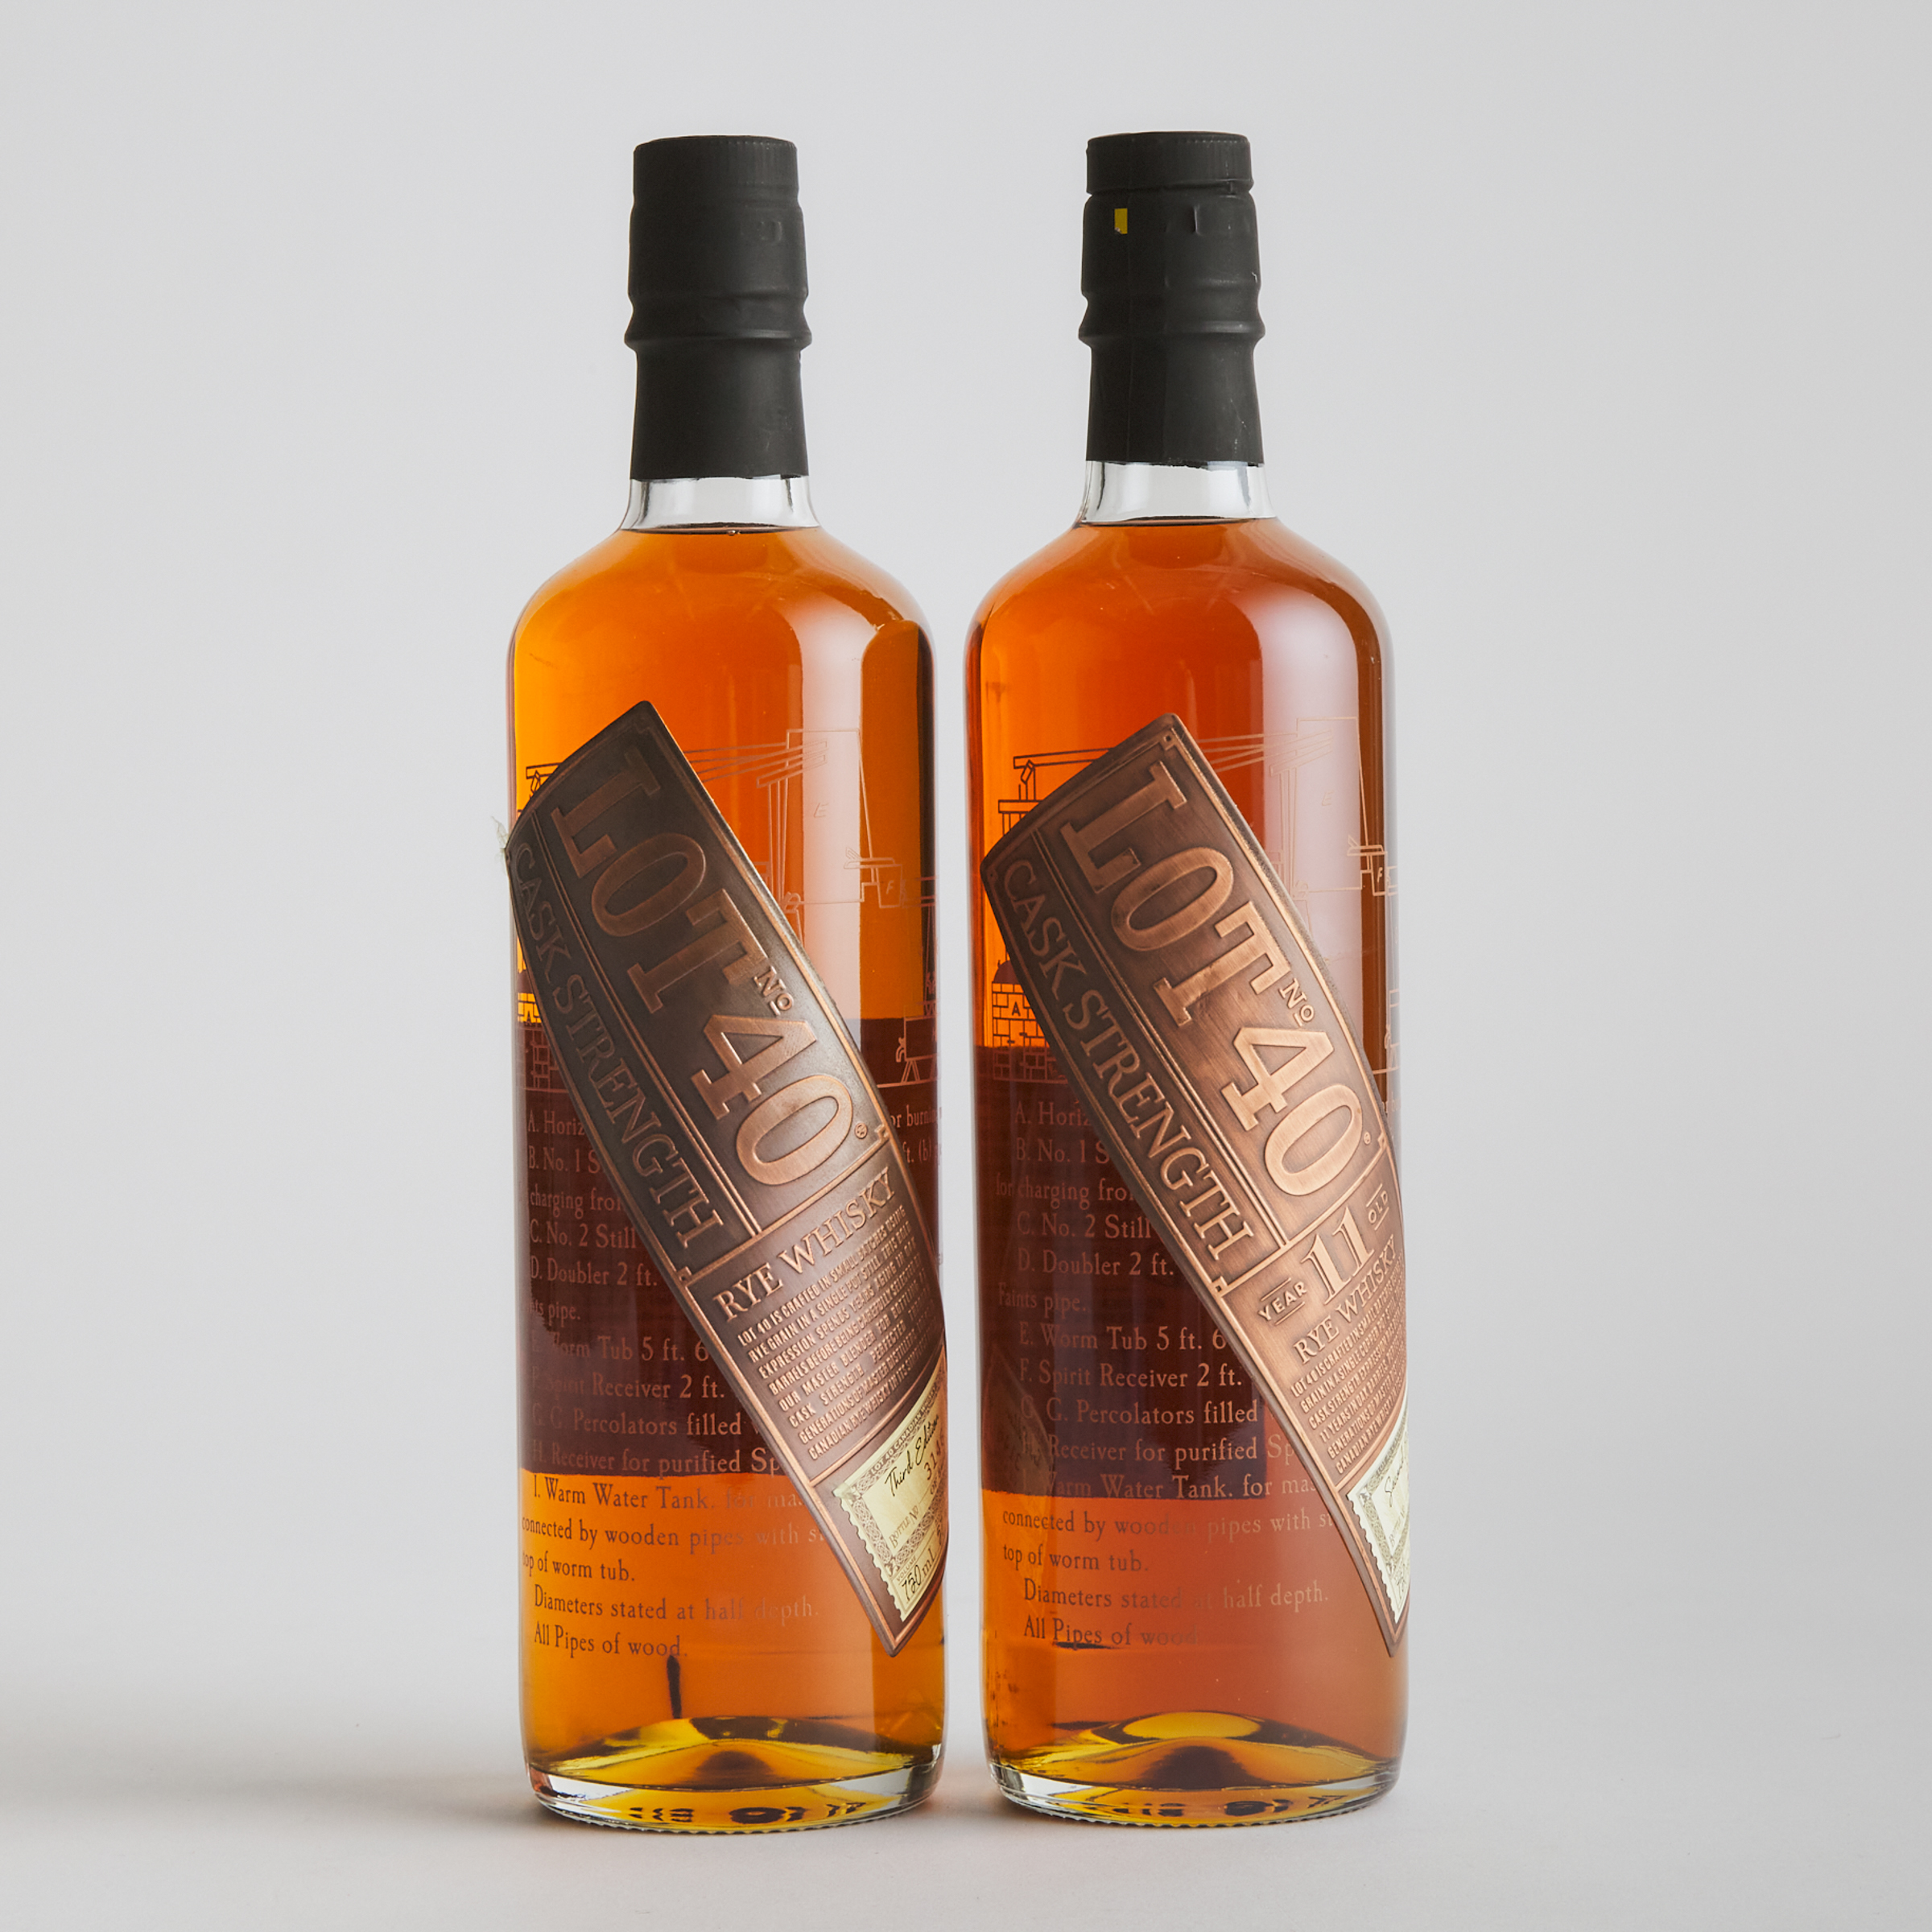 LOT 40 CASK STRENGTH RYE WHISKY 11 YEARS (ONE 750 ML)LOT 40 CASK STRENGTH RYE WHISKY NAS (ONE 750 ML)